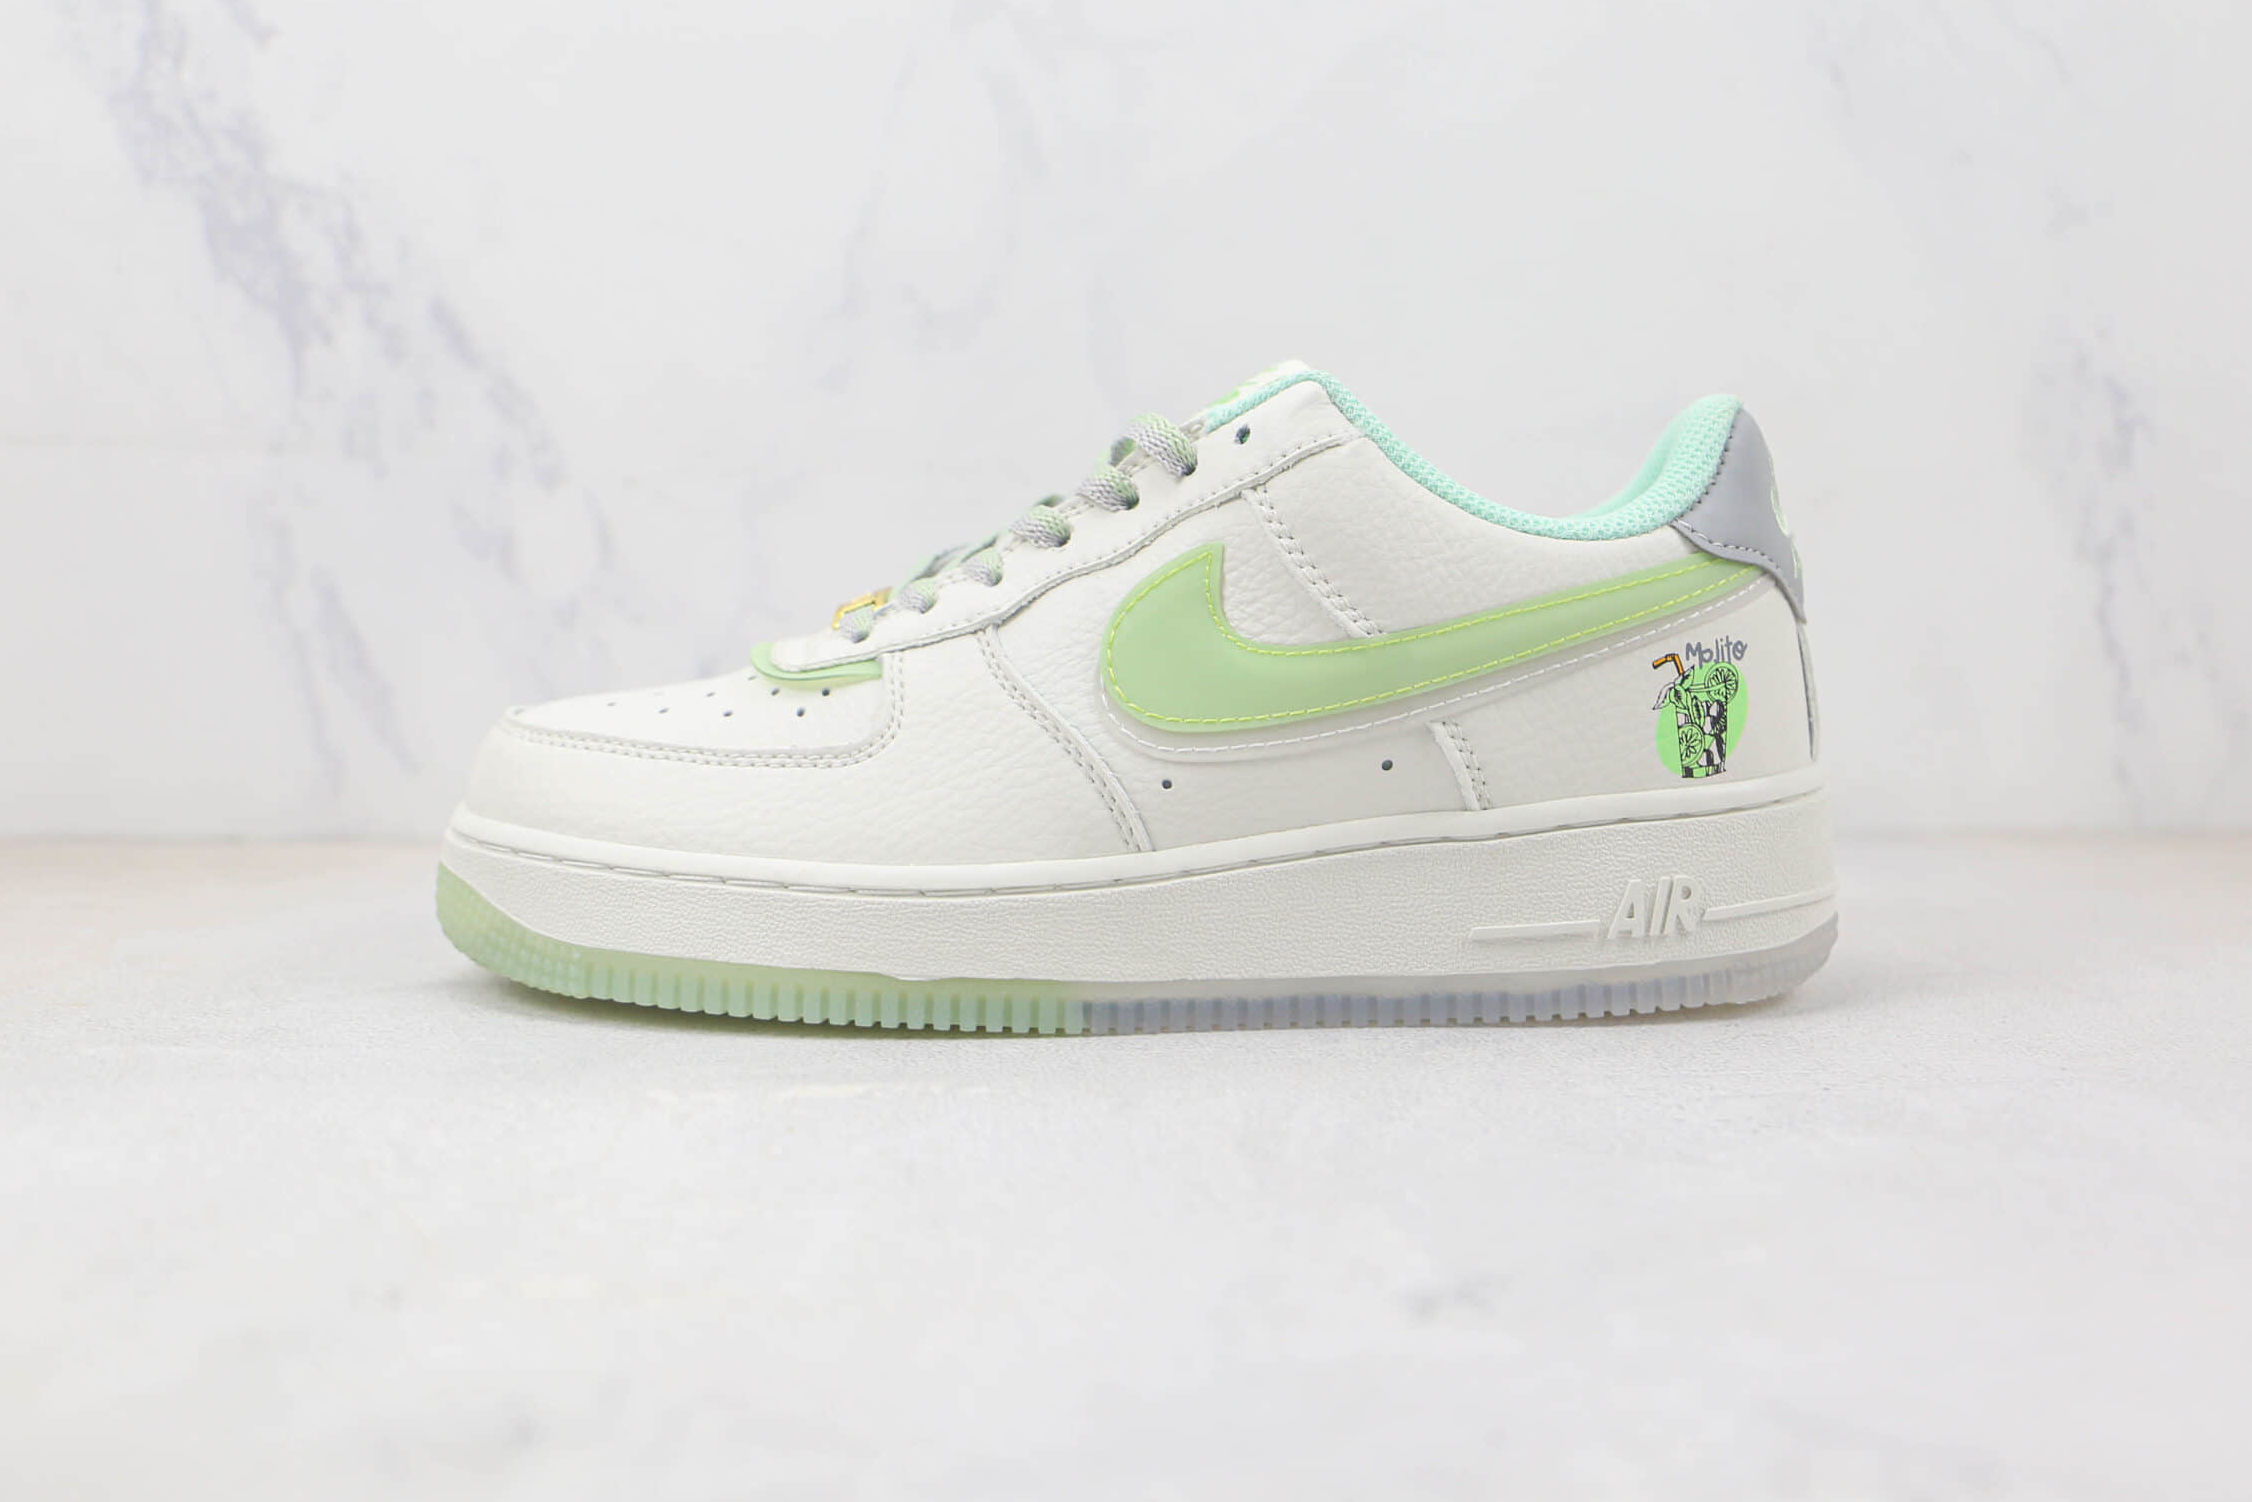 Nike Air Force 1 07 Low Mojito Green Grey White CW1574-802 | Ideal Blend of Style and Comfort